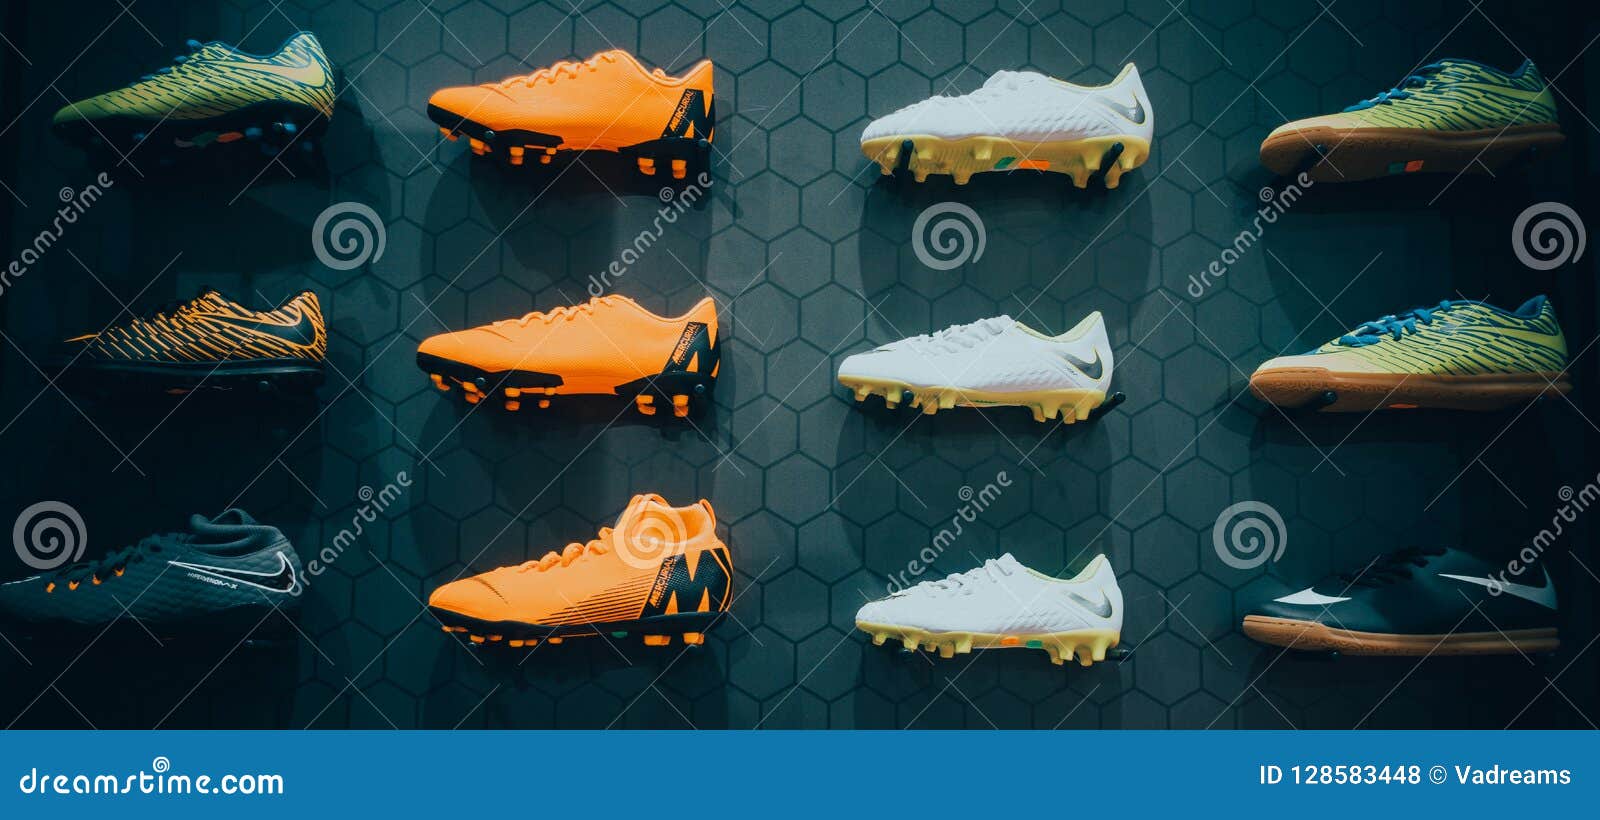 Vilnius, - August Nike Football Boots Displayed on Black Background in Sport Store Editorial Stock Photo Image of activity, retail: 128583448